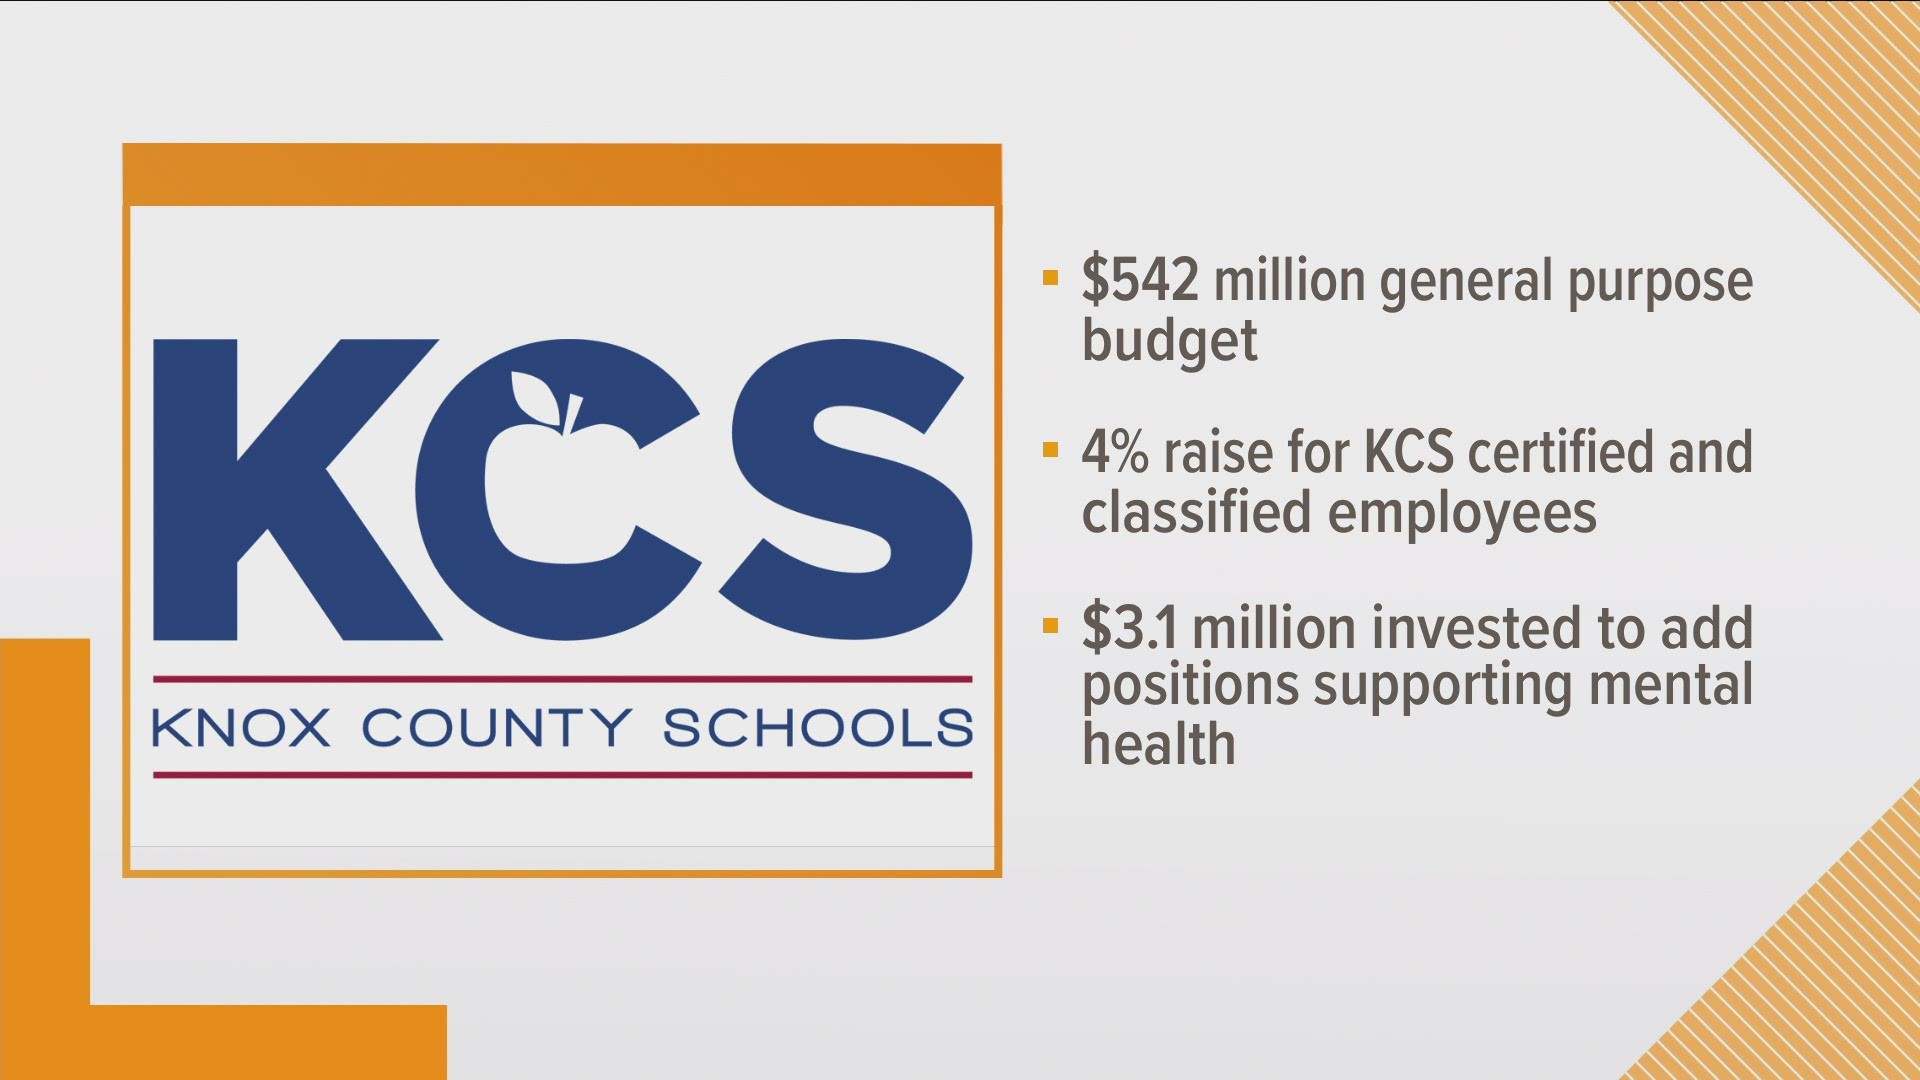 It includes a general-purpose budget of $542 million, a $58 million capital budget, and a $27 million school nutrition budget.